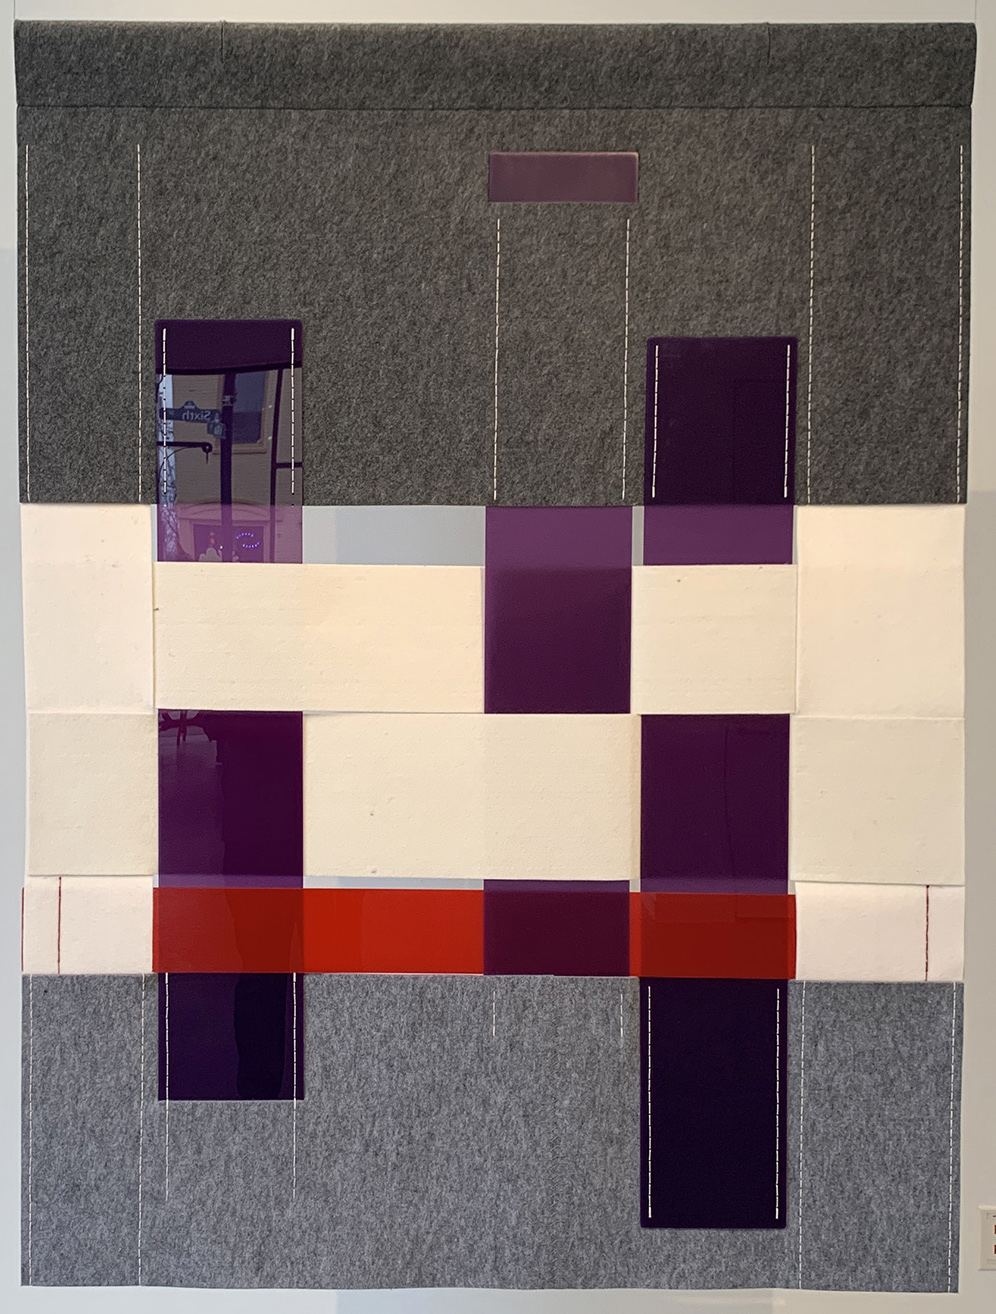 Collective 24 (pi: 785…746), 2022, 4.7mm acrylic felt, translucent and sanded 1/8” acrylic sheets, 8/4 cotton carpet warp yarn, size 5 pearl cotton thread, PVC and aluminum pipe, 68 x 51 x 1.5